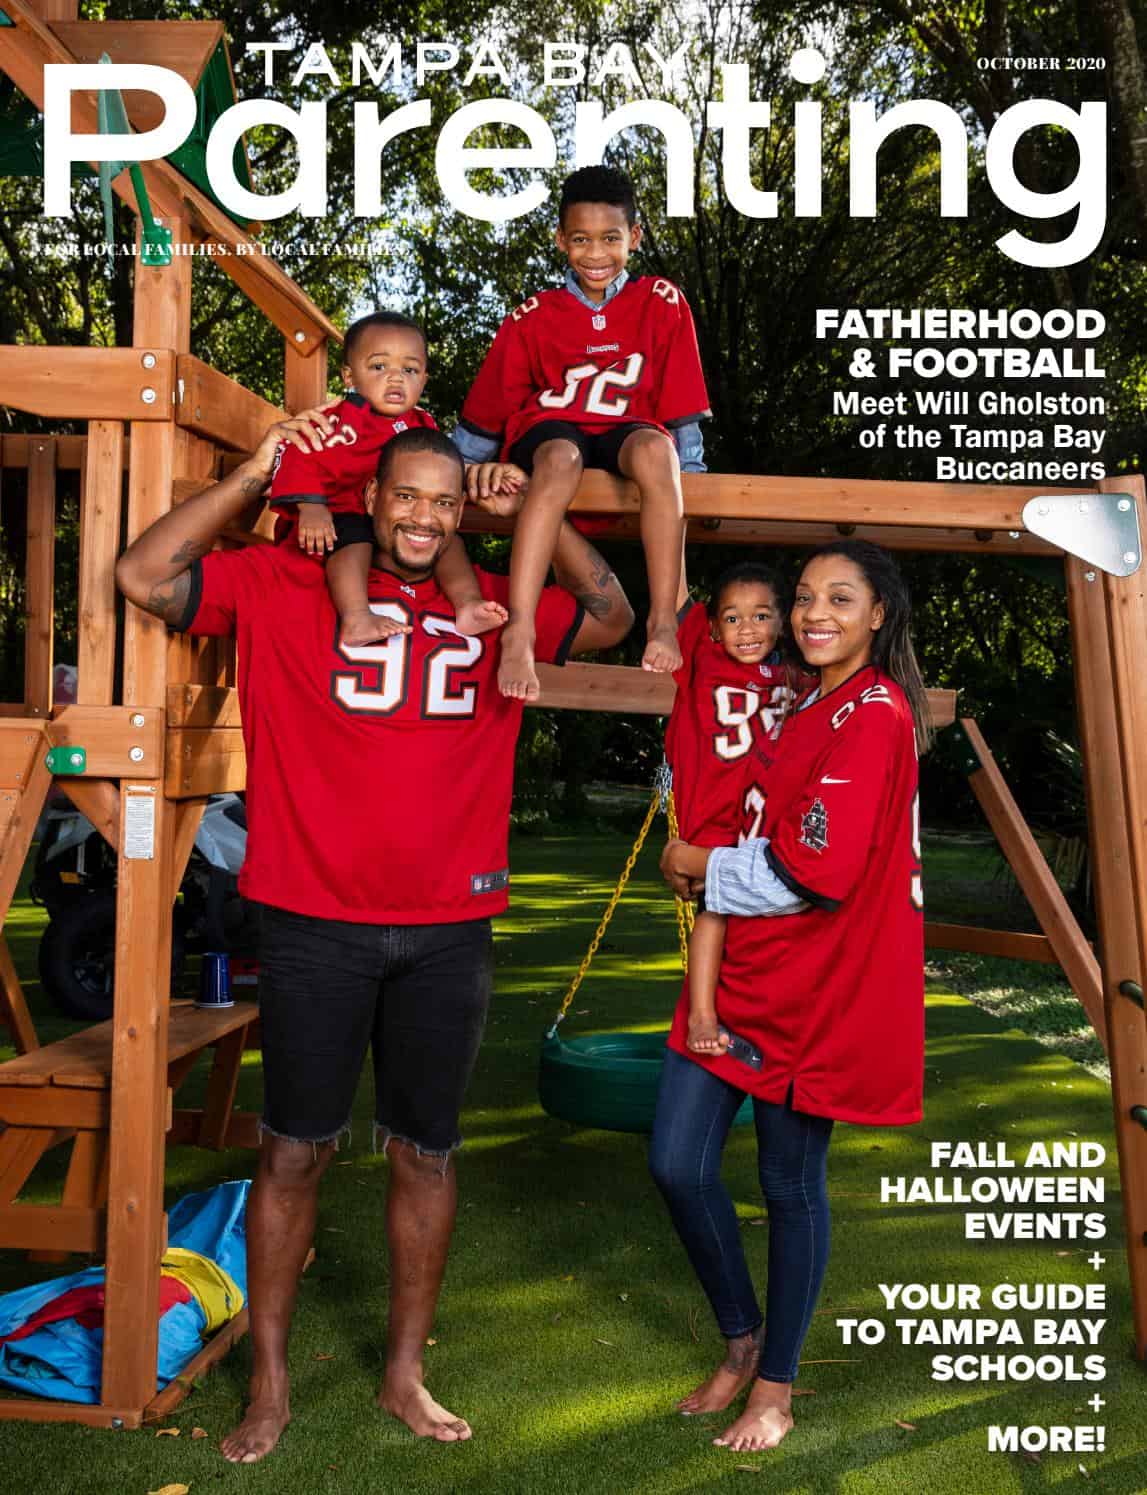 October 2020 Issue of Tampa Bay Parenting Magazine